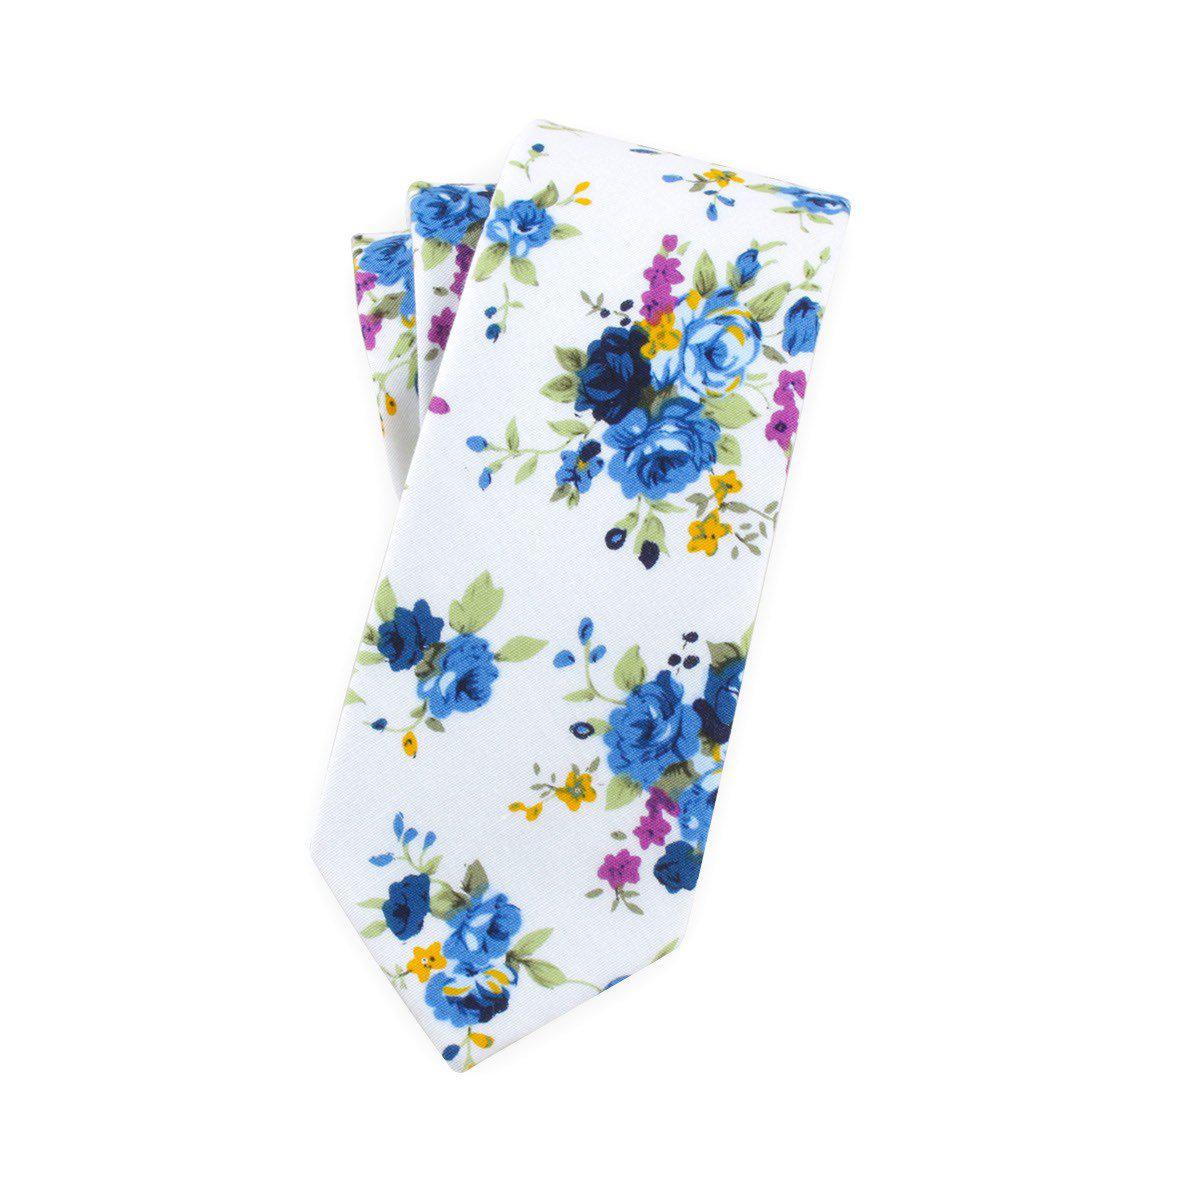 White Floral Tie 2.36&quot; SAGE - MYTIESHOP | toile de jouy Floral print-Neckties-Dry flowers Floral skinny tie for anniversaries weddings prom and other events. Flower cotton necktie. toile de jouy Floral tie White floral tie white-Mytieshop. Skinny ties for weddings anniversaries. Father of bride. Groomsmen. Cool skinny neckties for men. Neckwear for prom, missions and fancy events. Gift ideas for men. Anniversaries ideas. Wedding aesthetics. Flower ties. Dry flower ties.